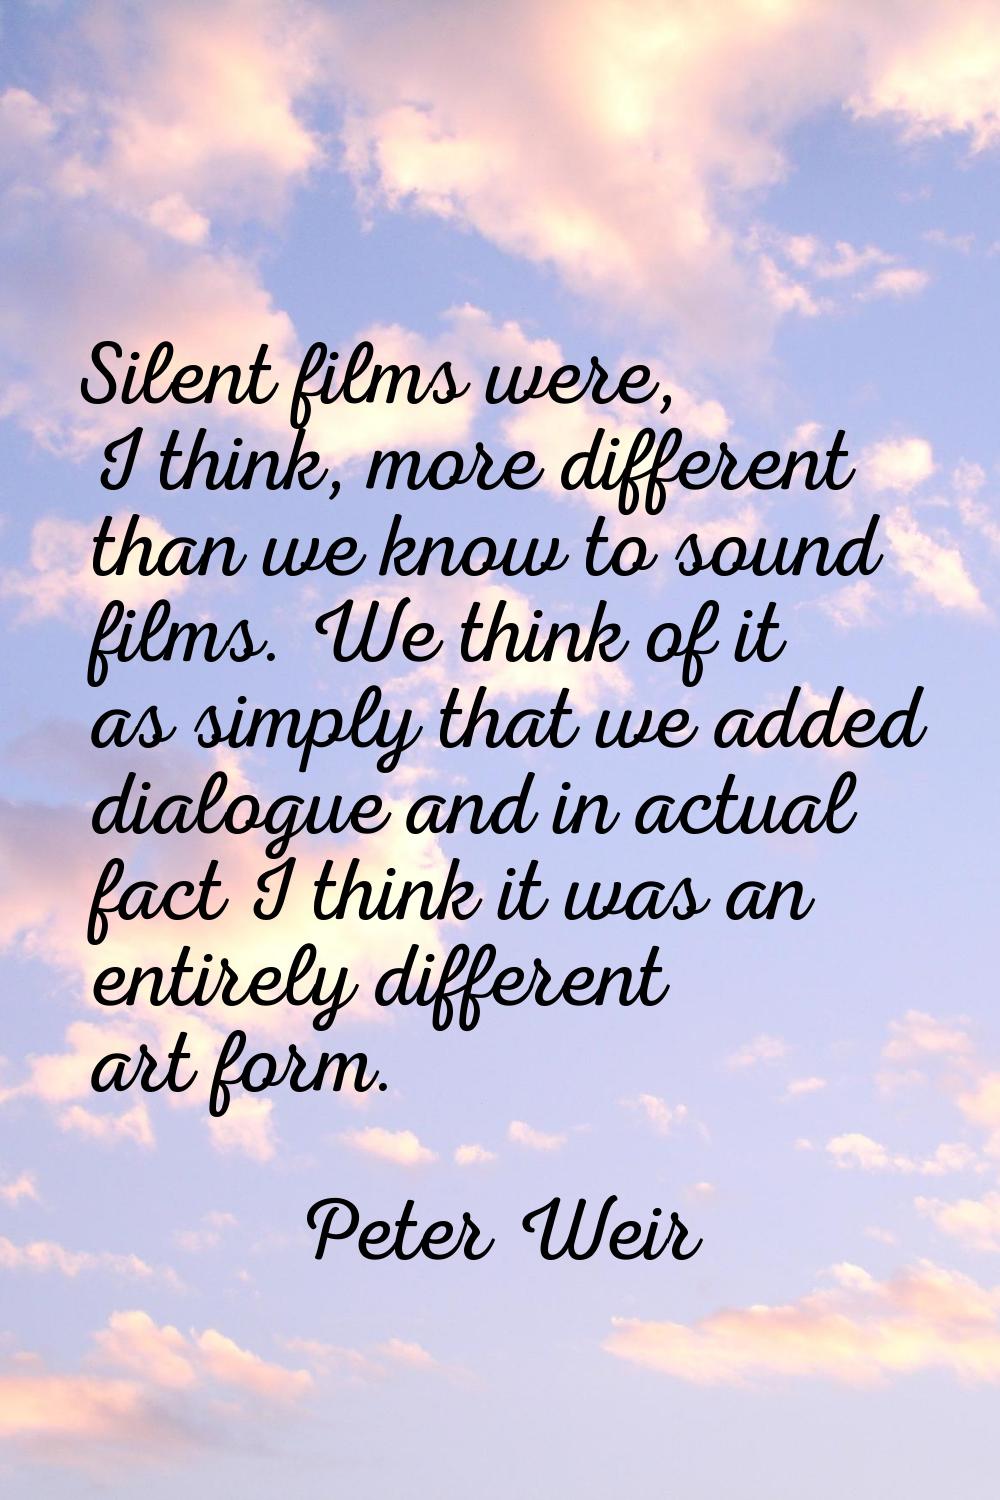 Silent films were, I think, more different than we know to sound films. We think of it as simply th